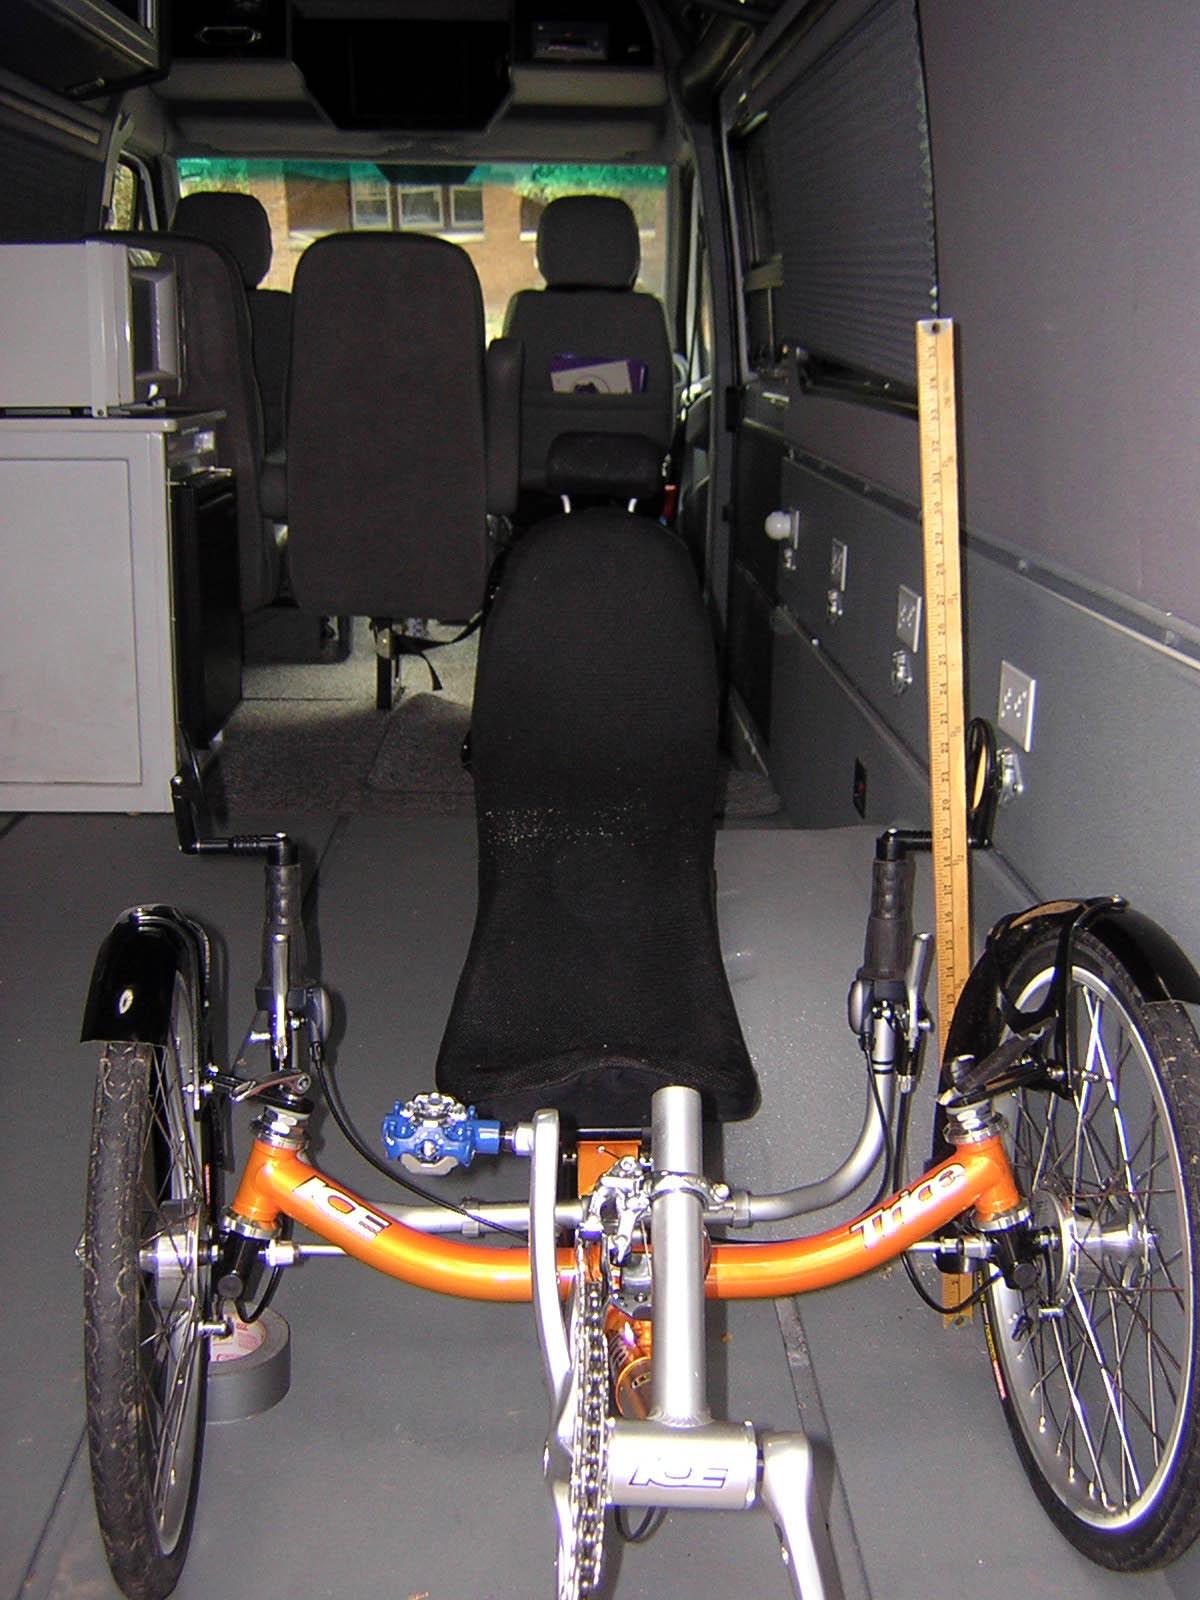 the vehicle has a bicycle attached to the side